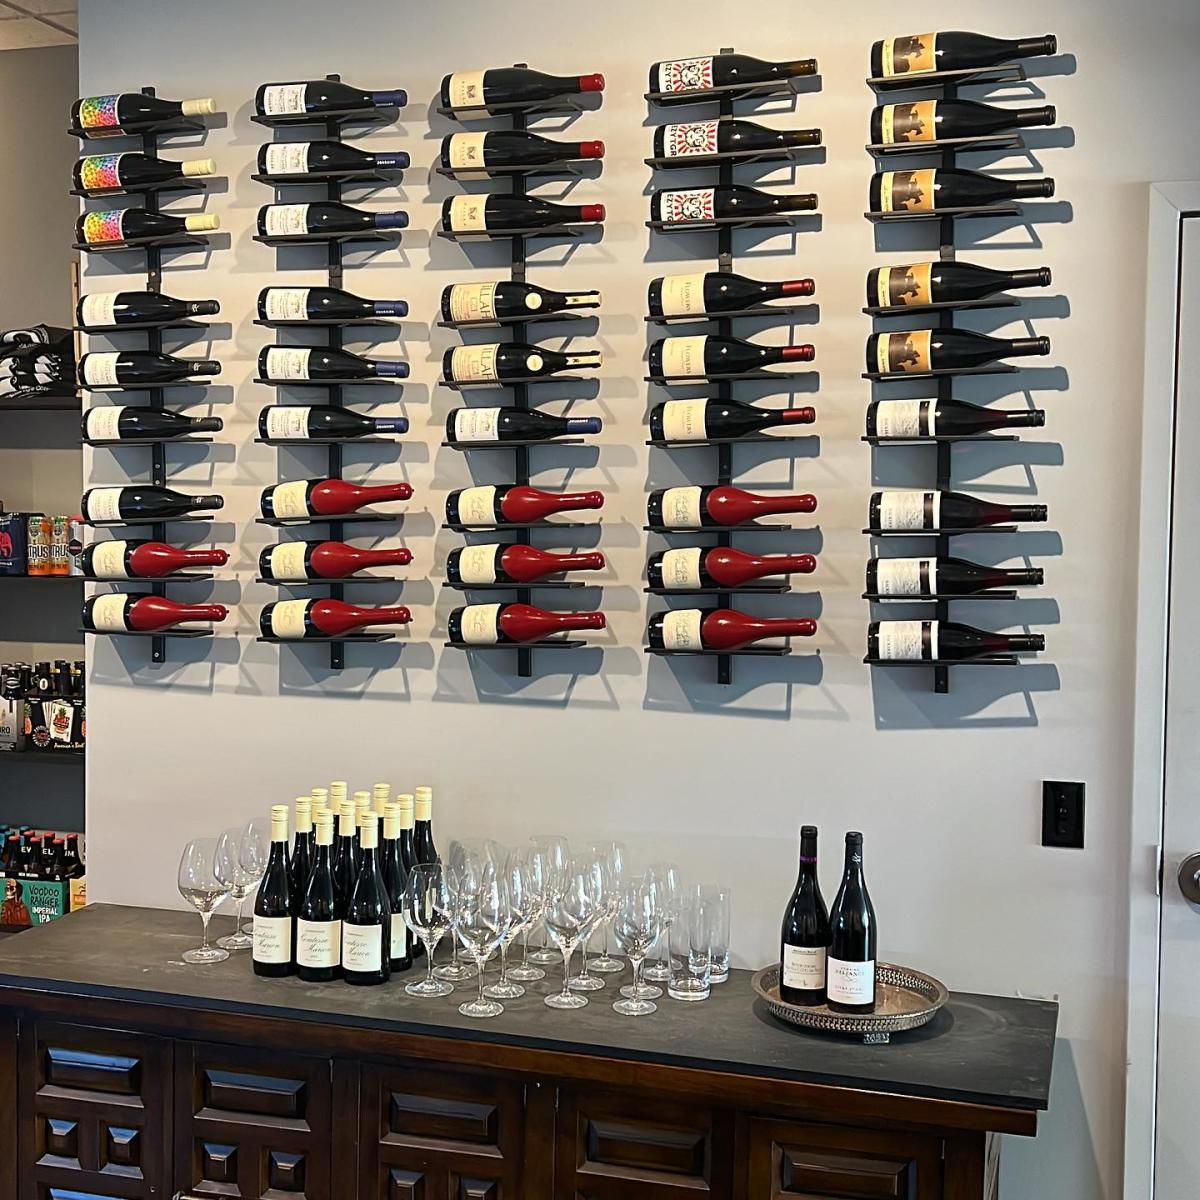 Wine selections displayed at The Bottle Shop in Allentown, PA